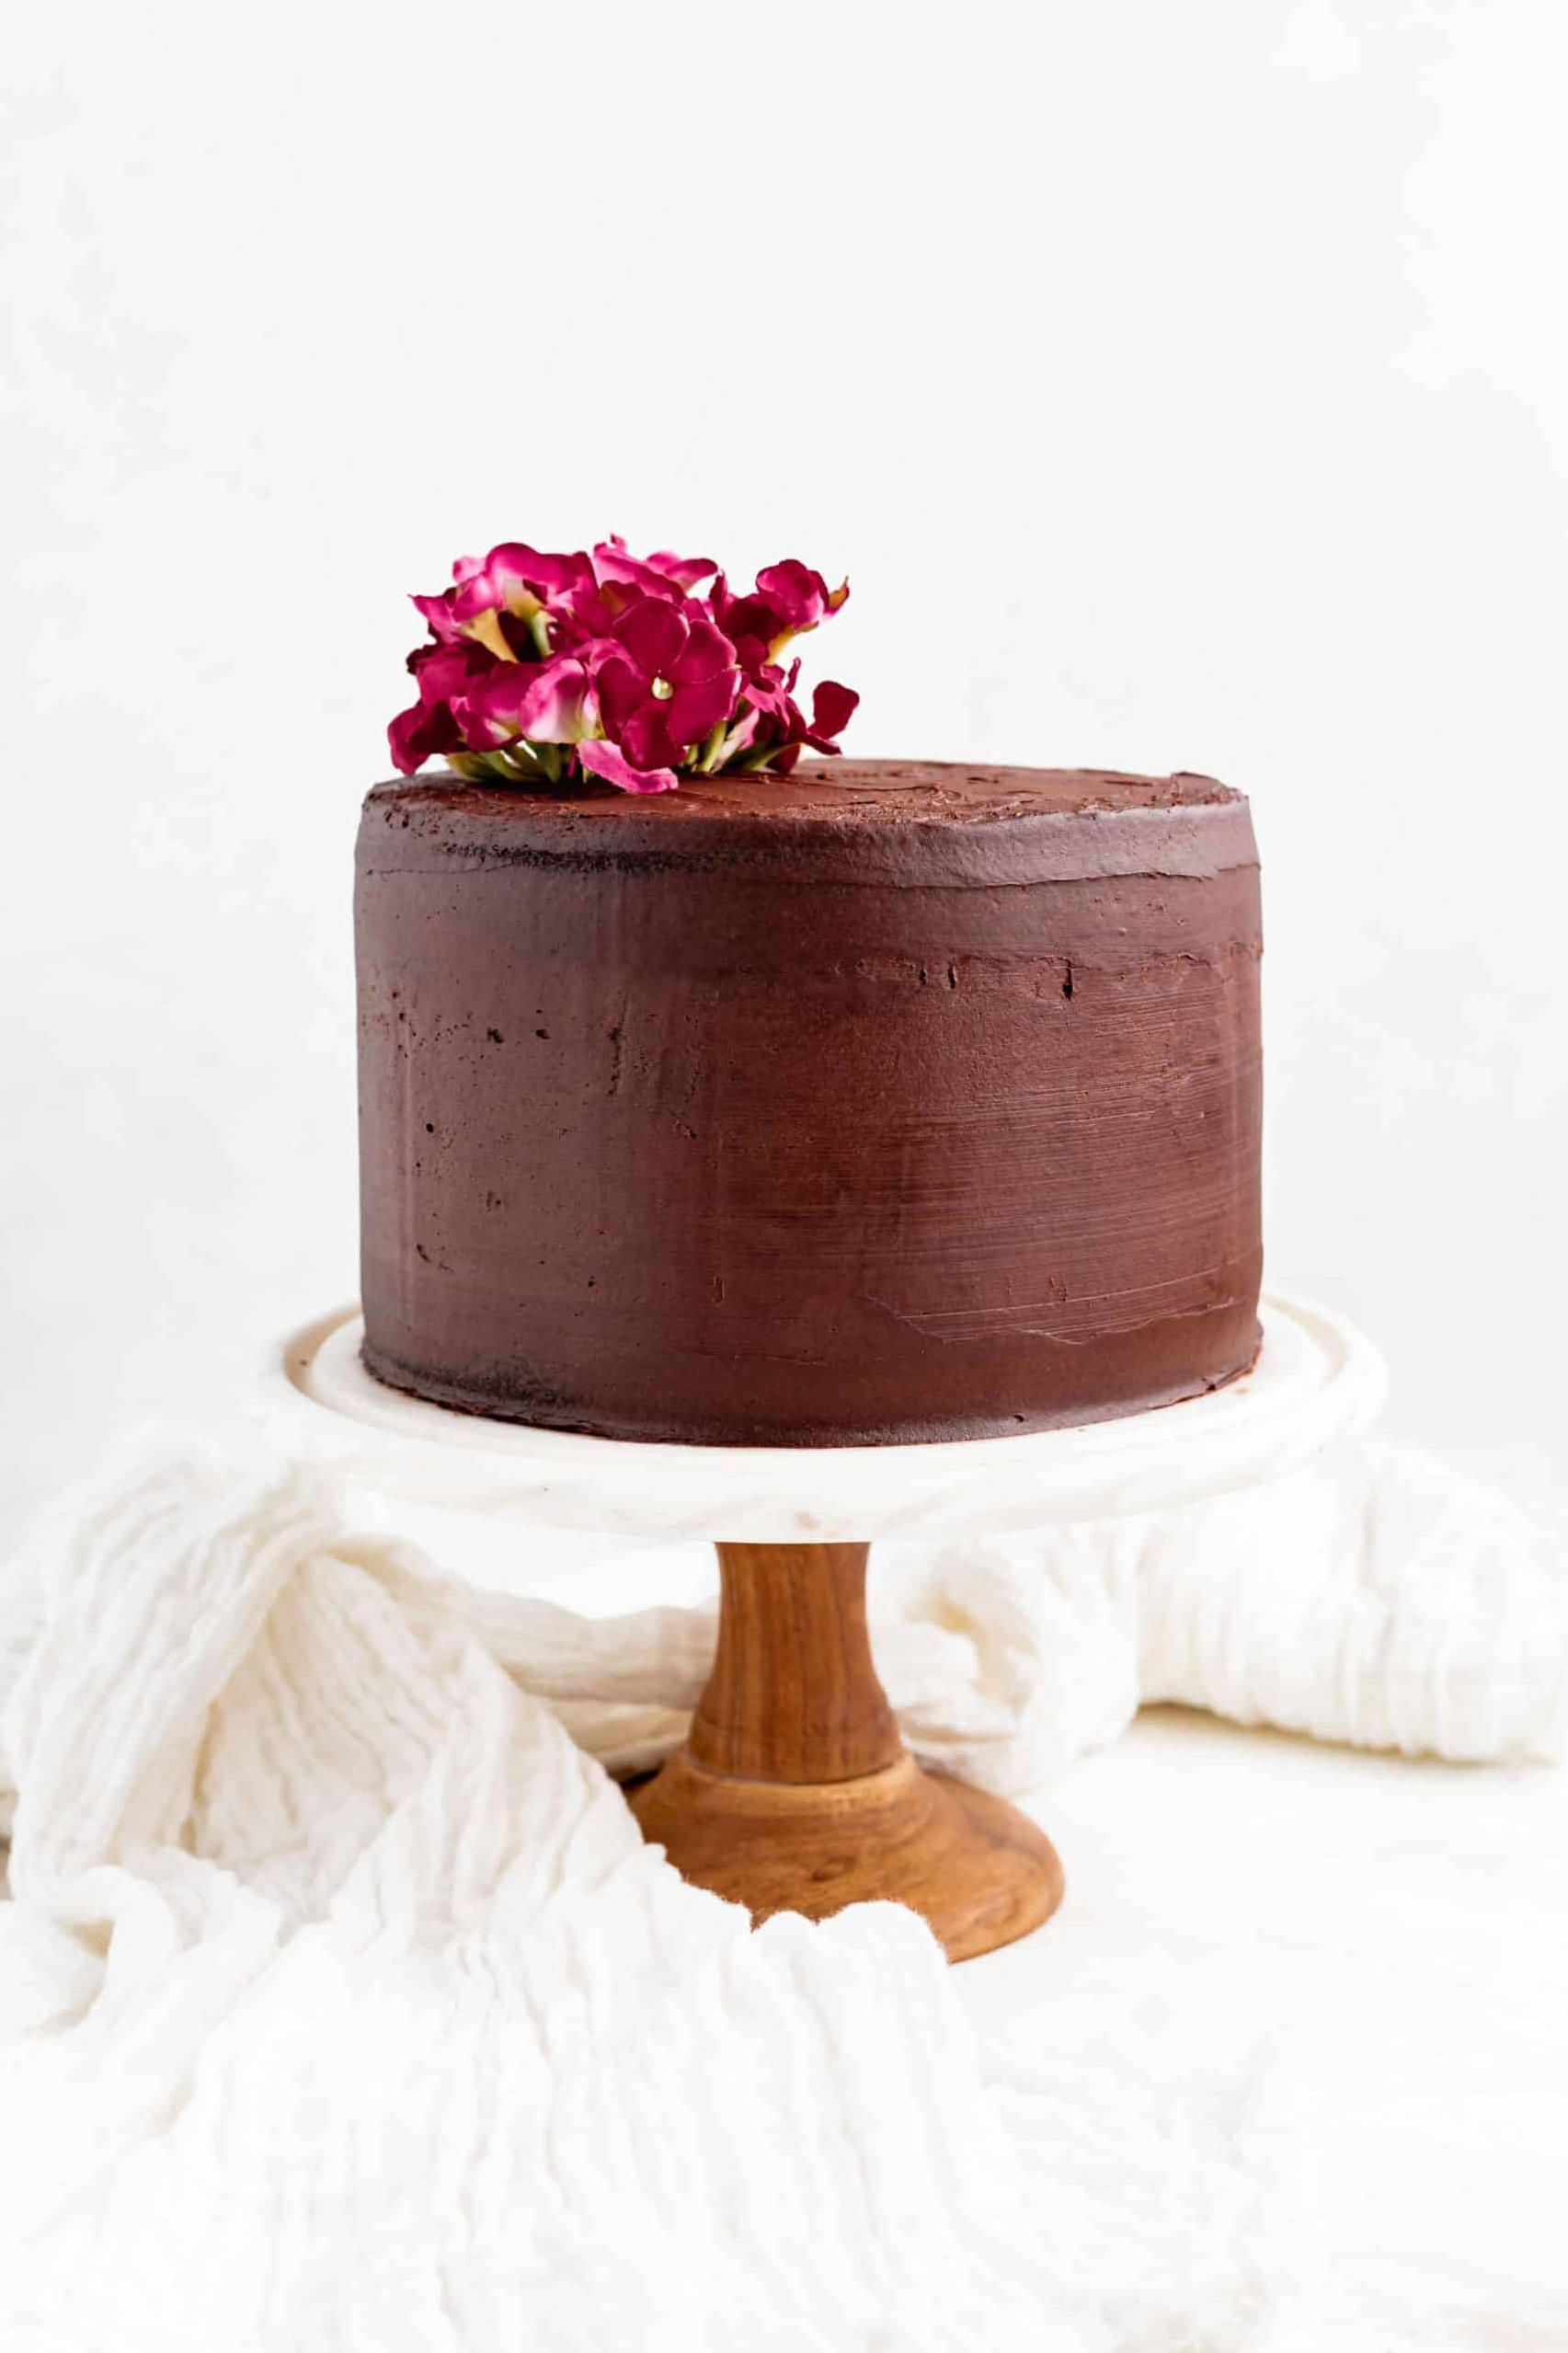  The aroma of red wine mixed with the chocolatey goodness of this cake will have your mouth watering.